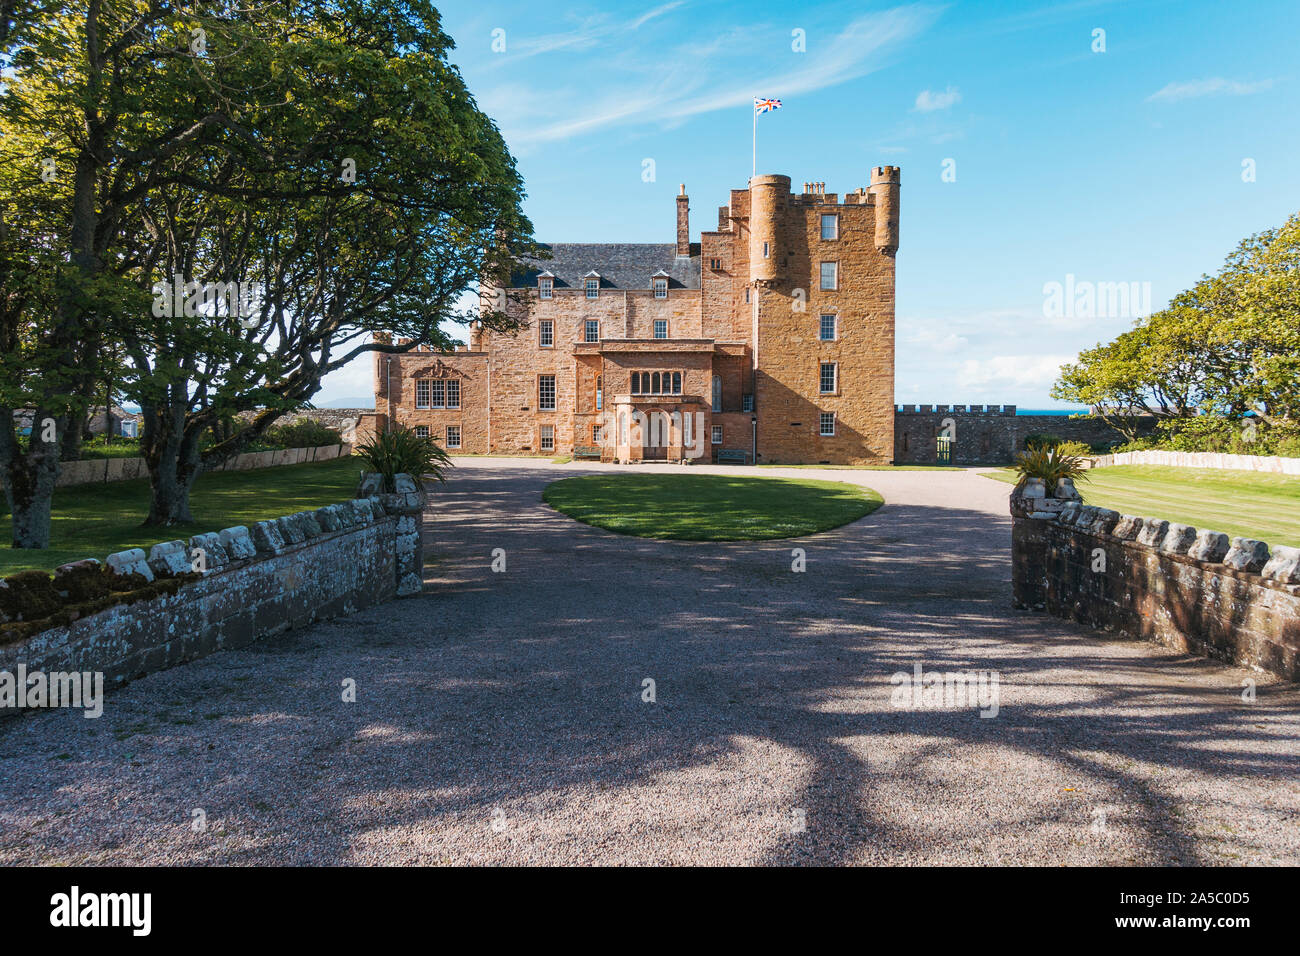 The Castle of Mey, built in the mid 16th century, bought and restored in the 1950s by Queen Elizabeth The Queen Mother. Now open to tourists May-Sept Stock Photo